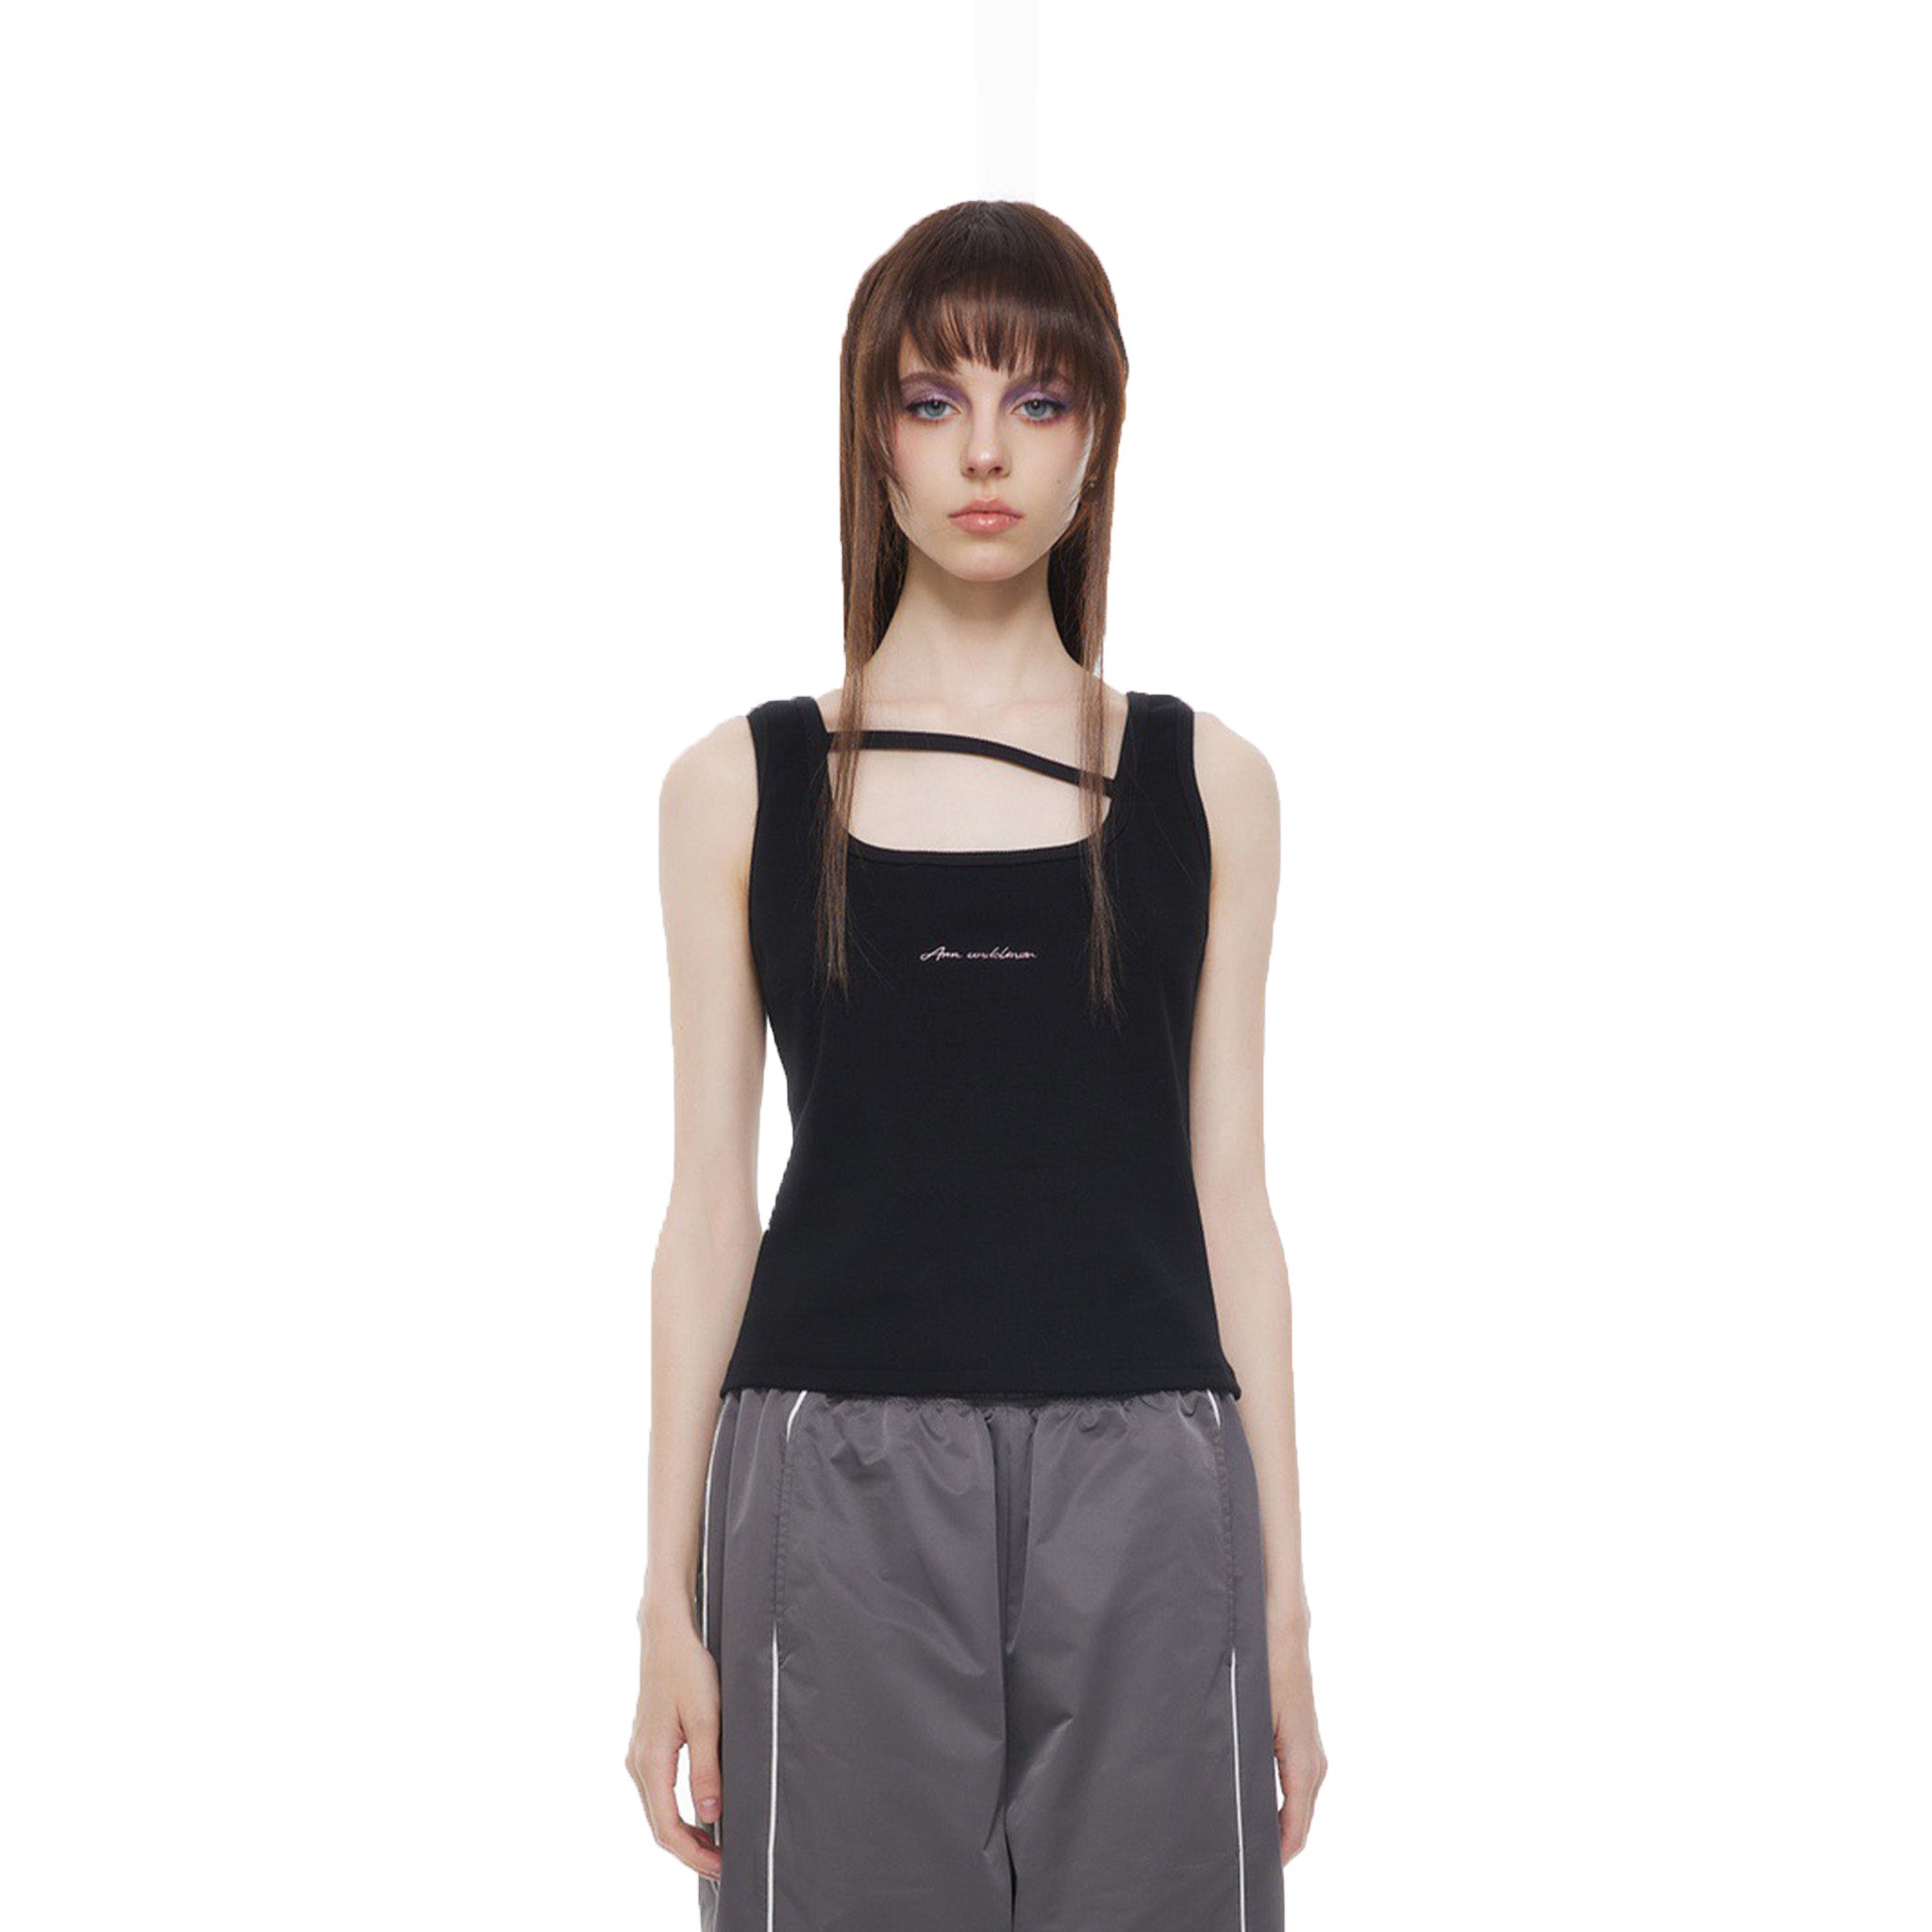 ANN ANDELMAN Black 520 Limited Tank Top | MADA IN CHINA